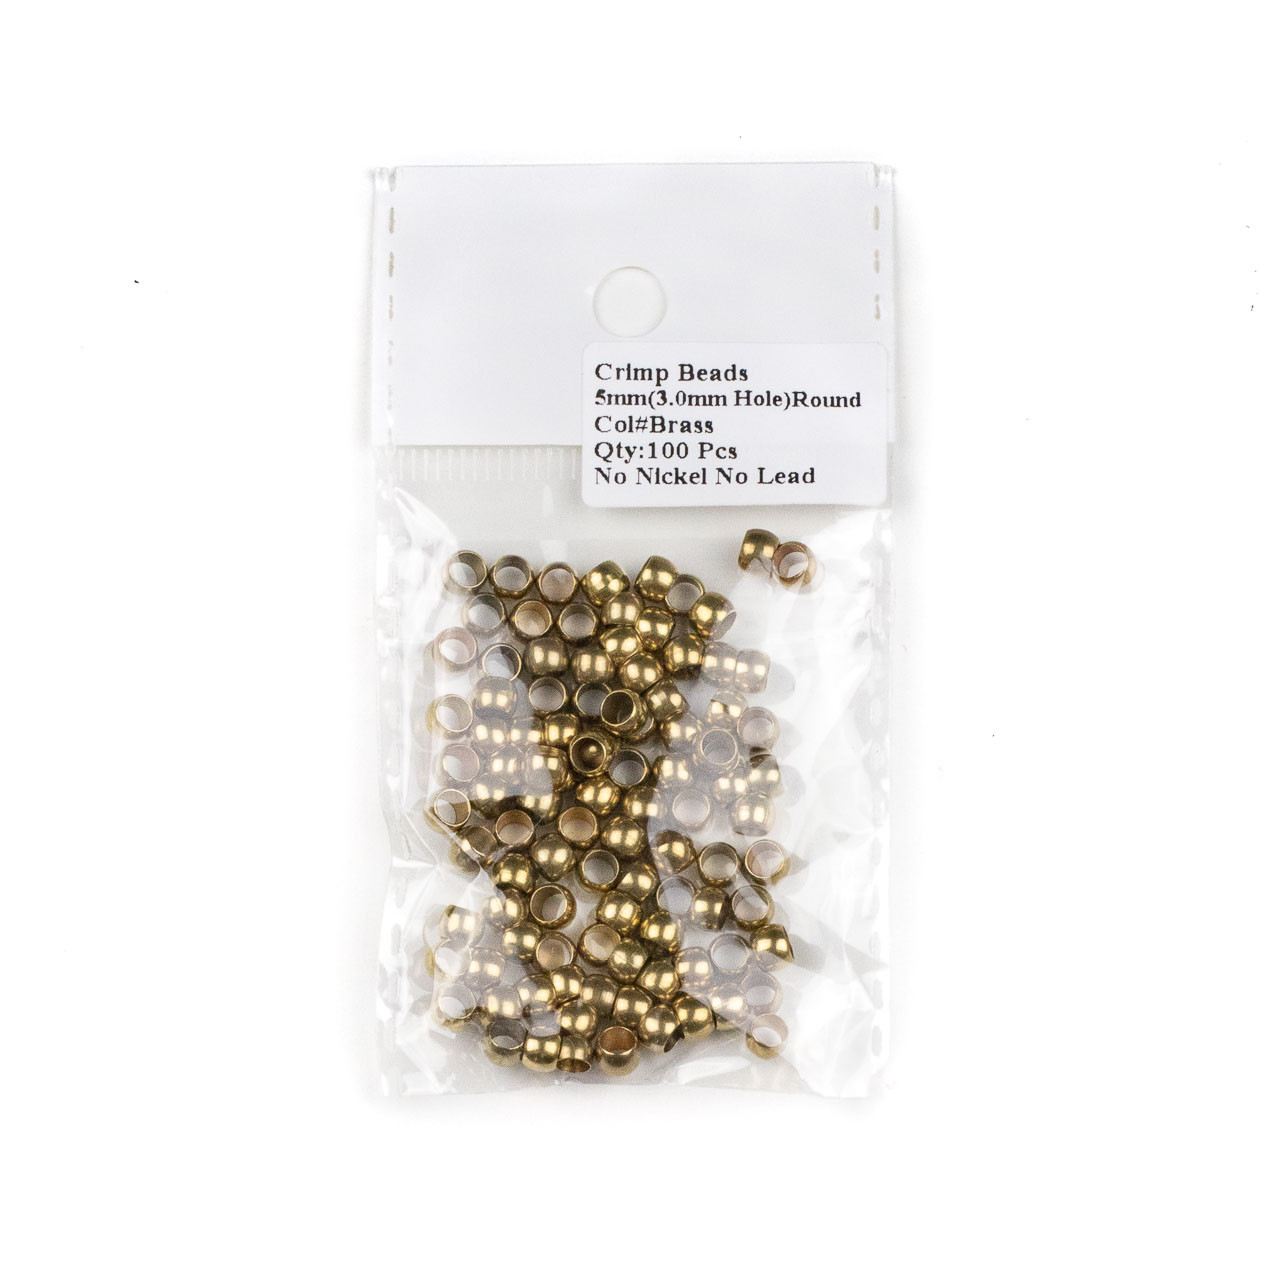 Brass 5mm Leather Crimp Beads with a 3mm Large Hole - 100 per bag -  brasslgcr5b-100